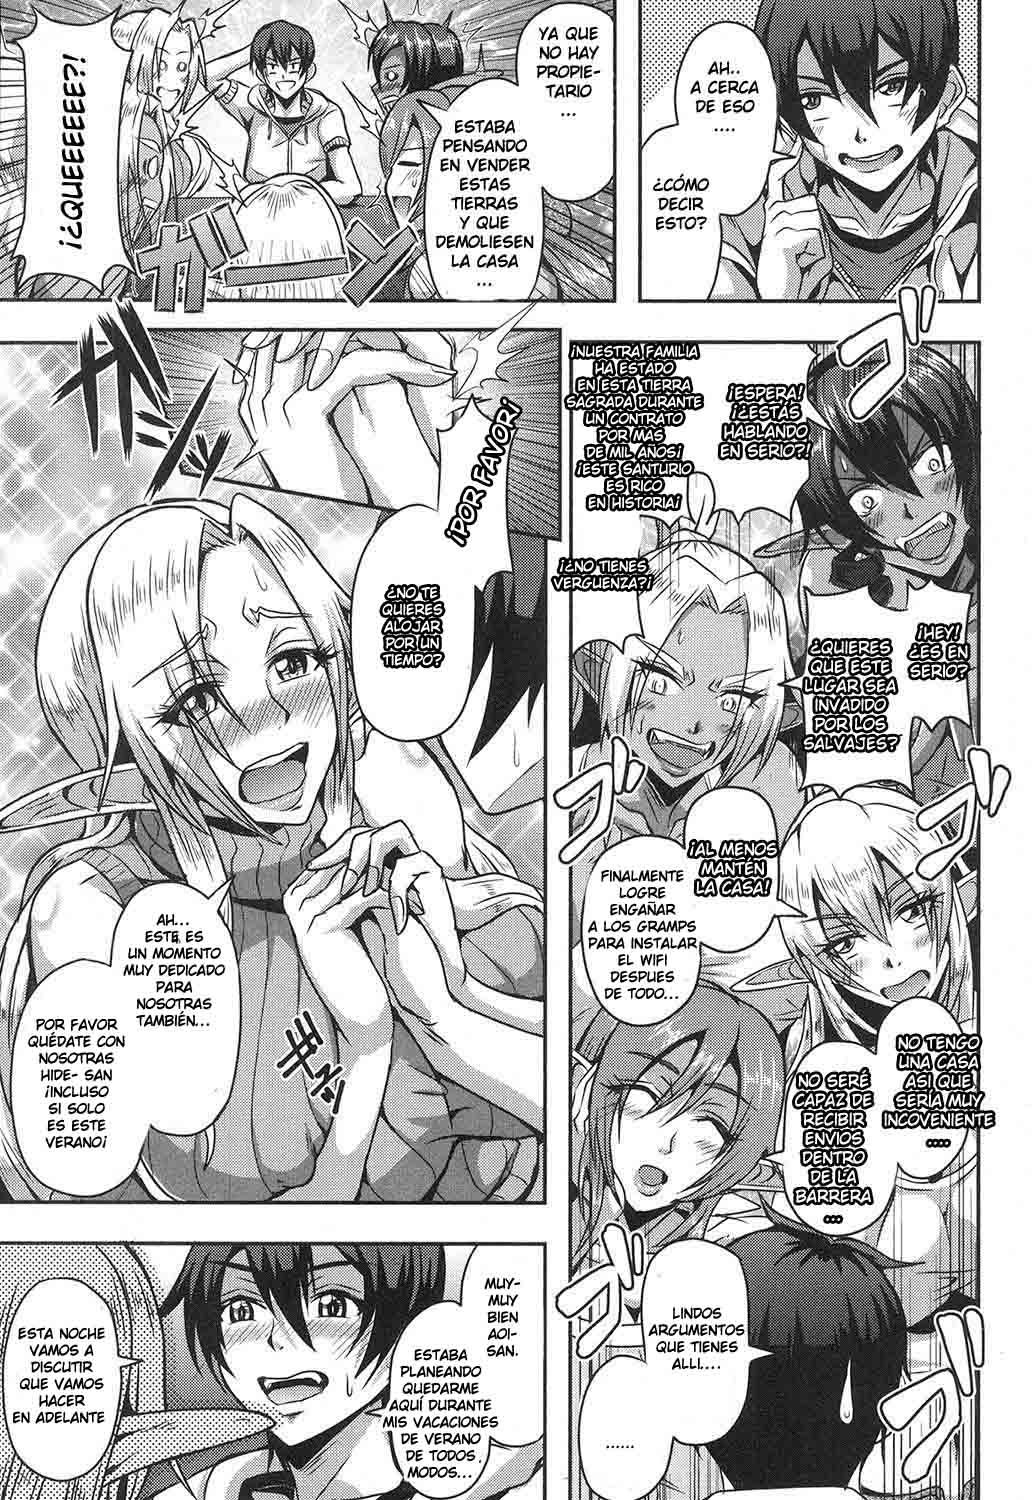 Baby-making contract with a harem of forest elves - 6